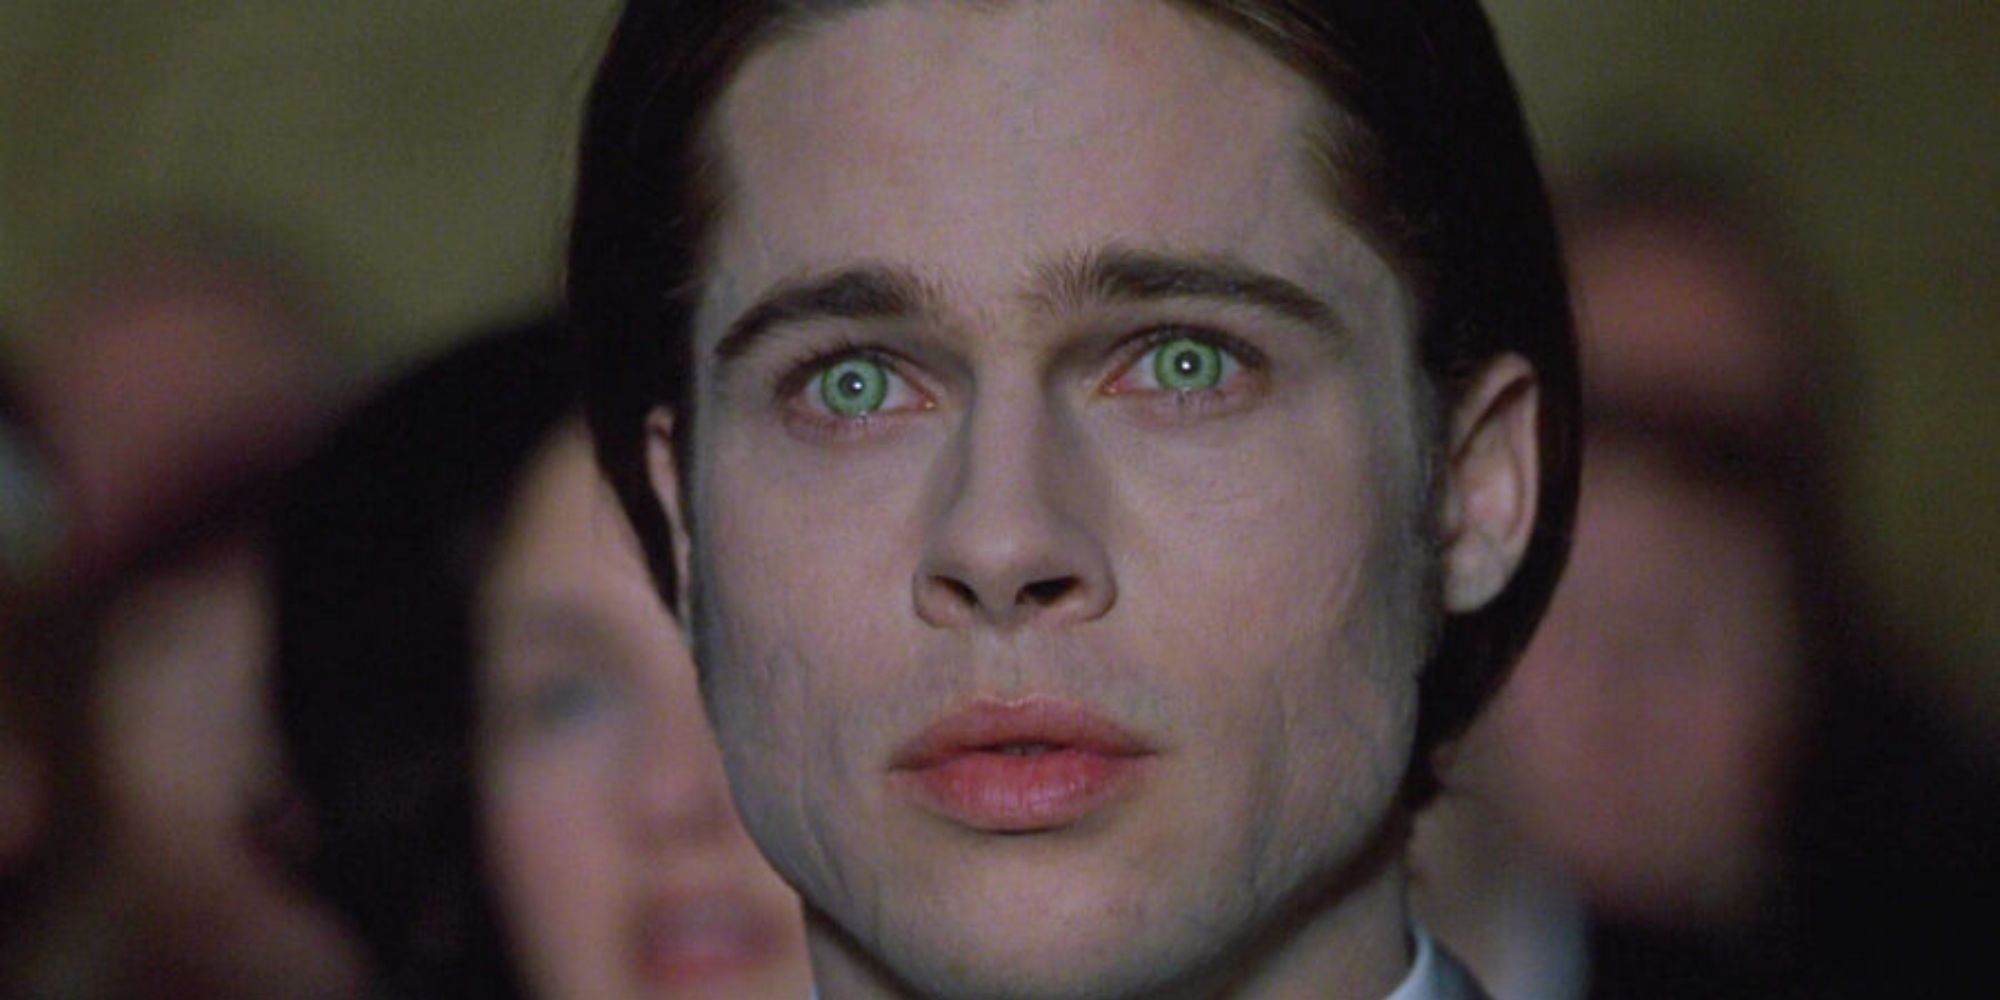 close up on a man with weirdly white skin and green eyes